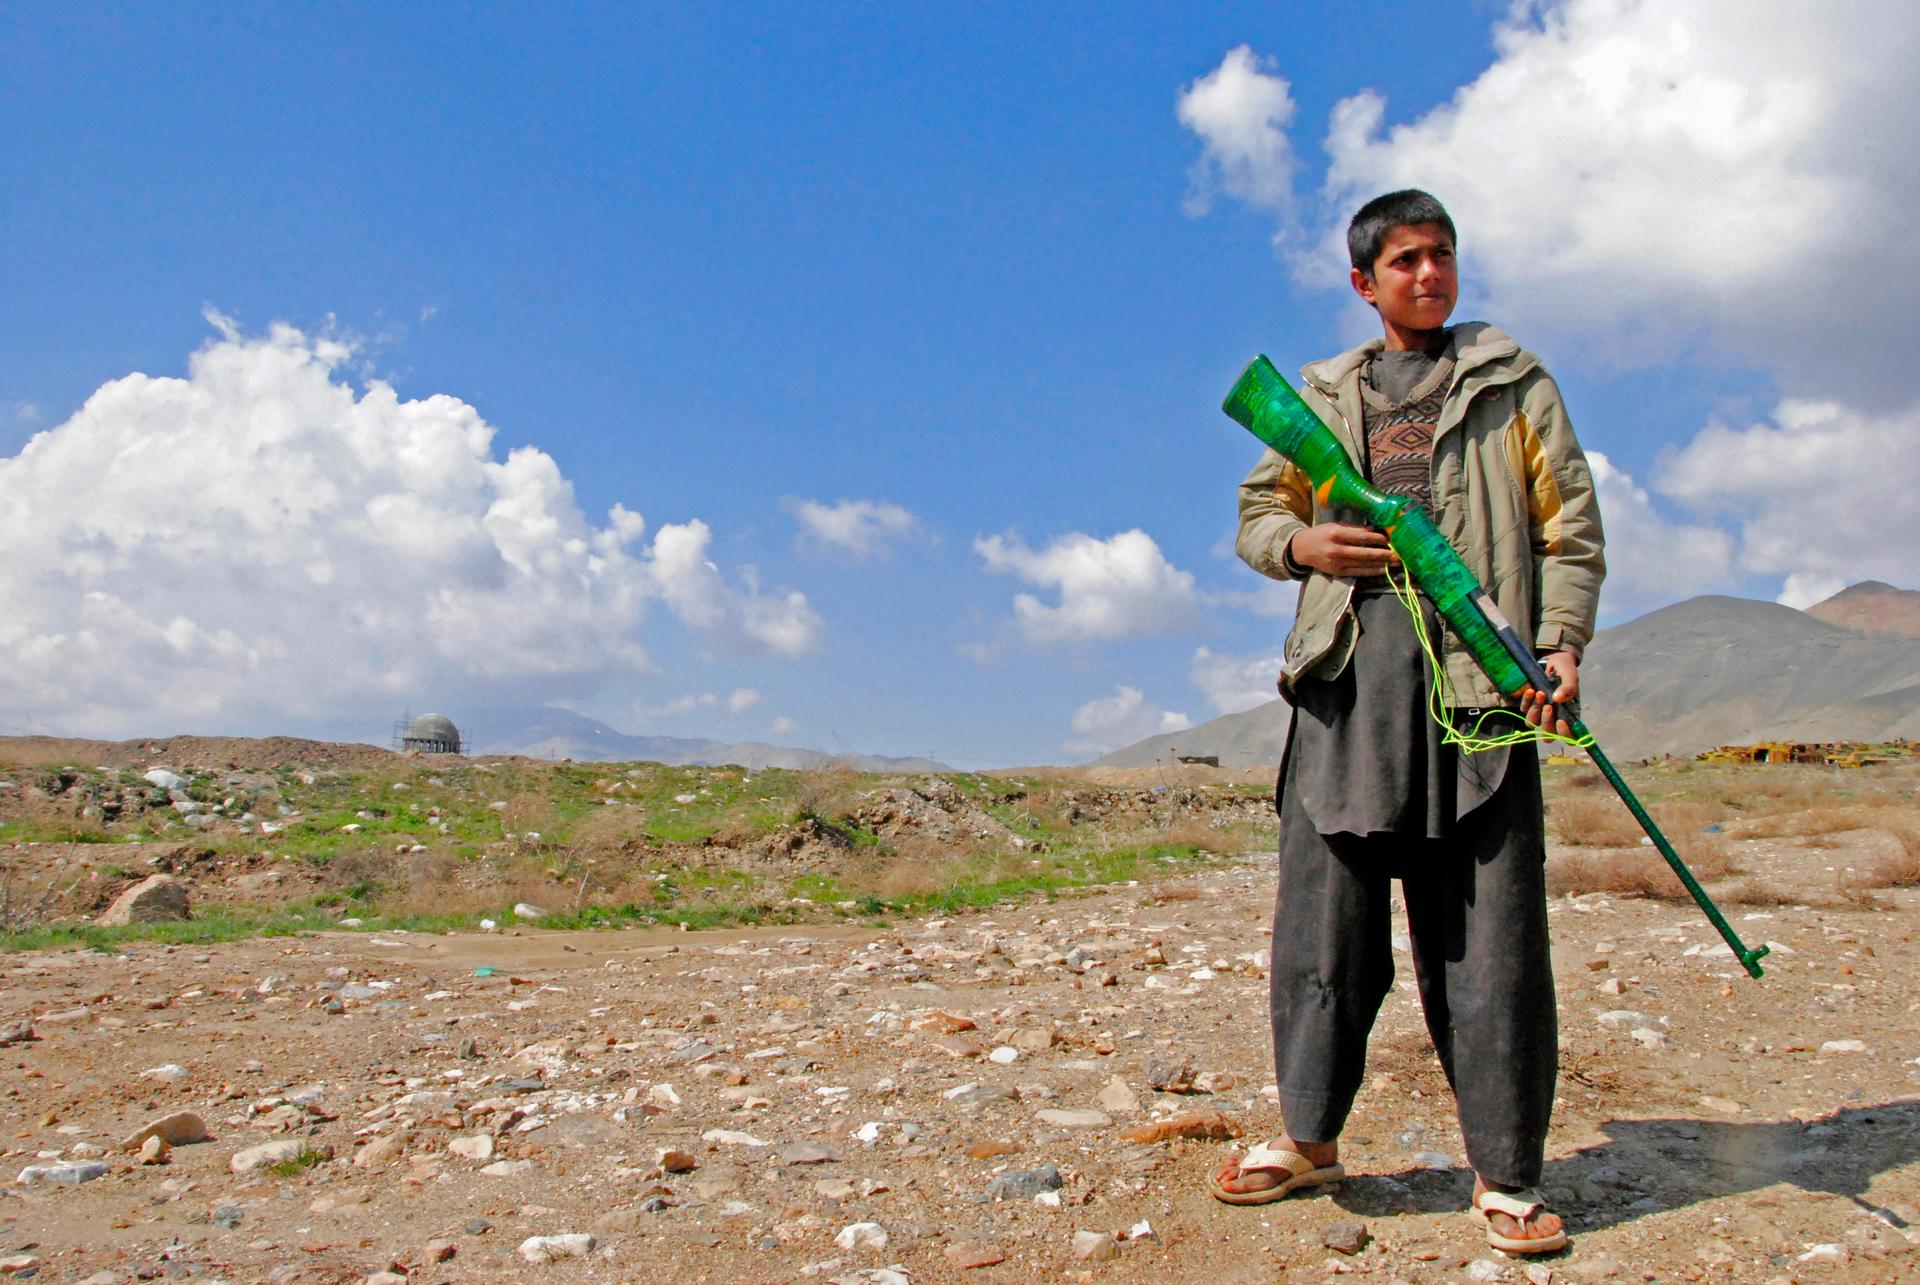 A young shepherd poses as a security guard with a toy gun on the outskirts of Kabul. The United Nations Special Representative to Afghanistan, Ján Kubiš, has stressed the need to prevent the recruitment of children as soldiers.